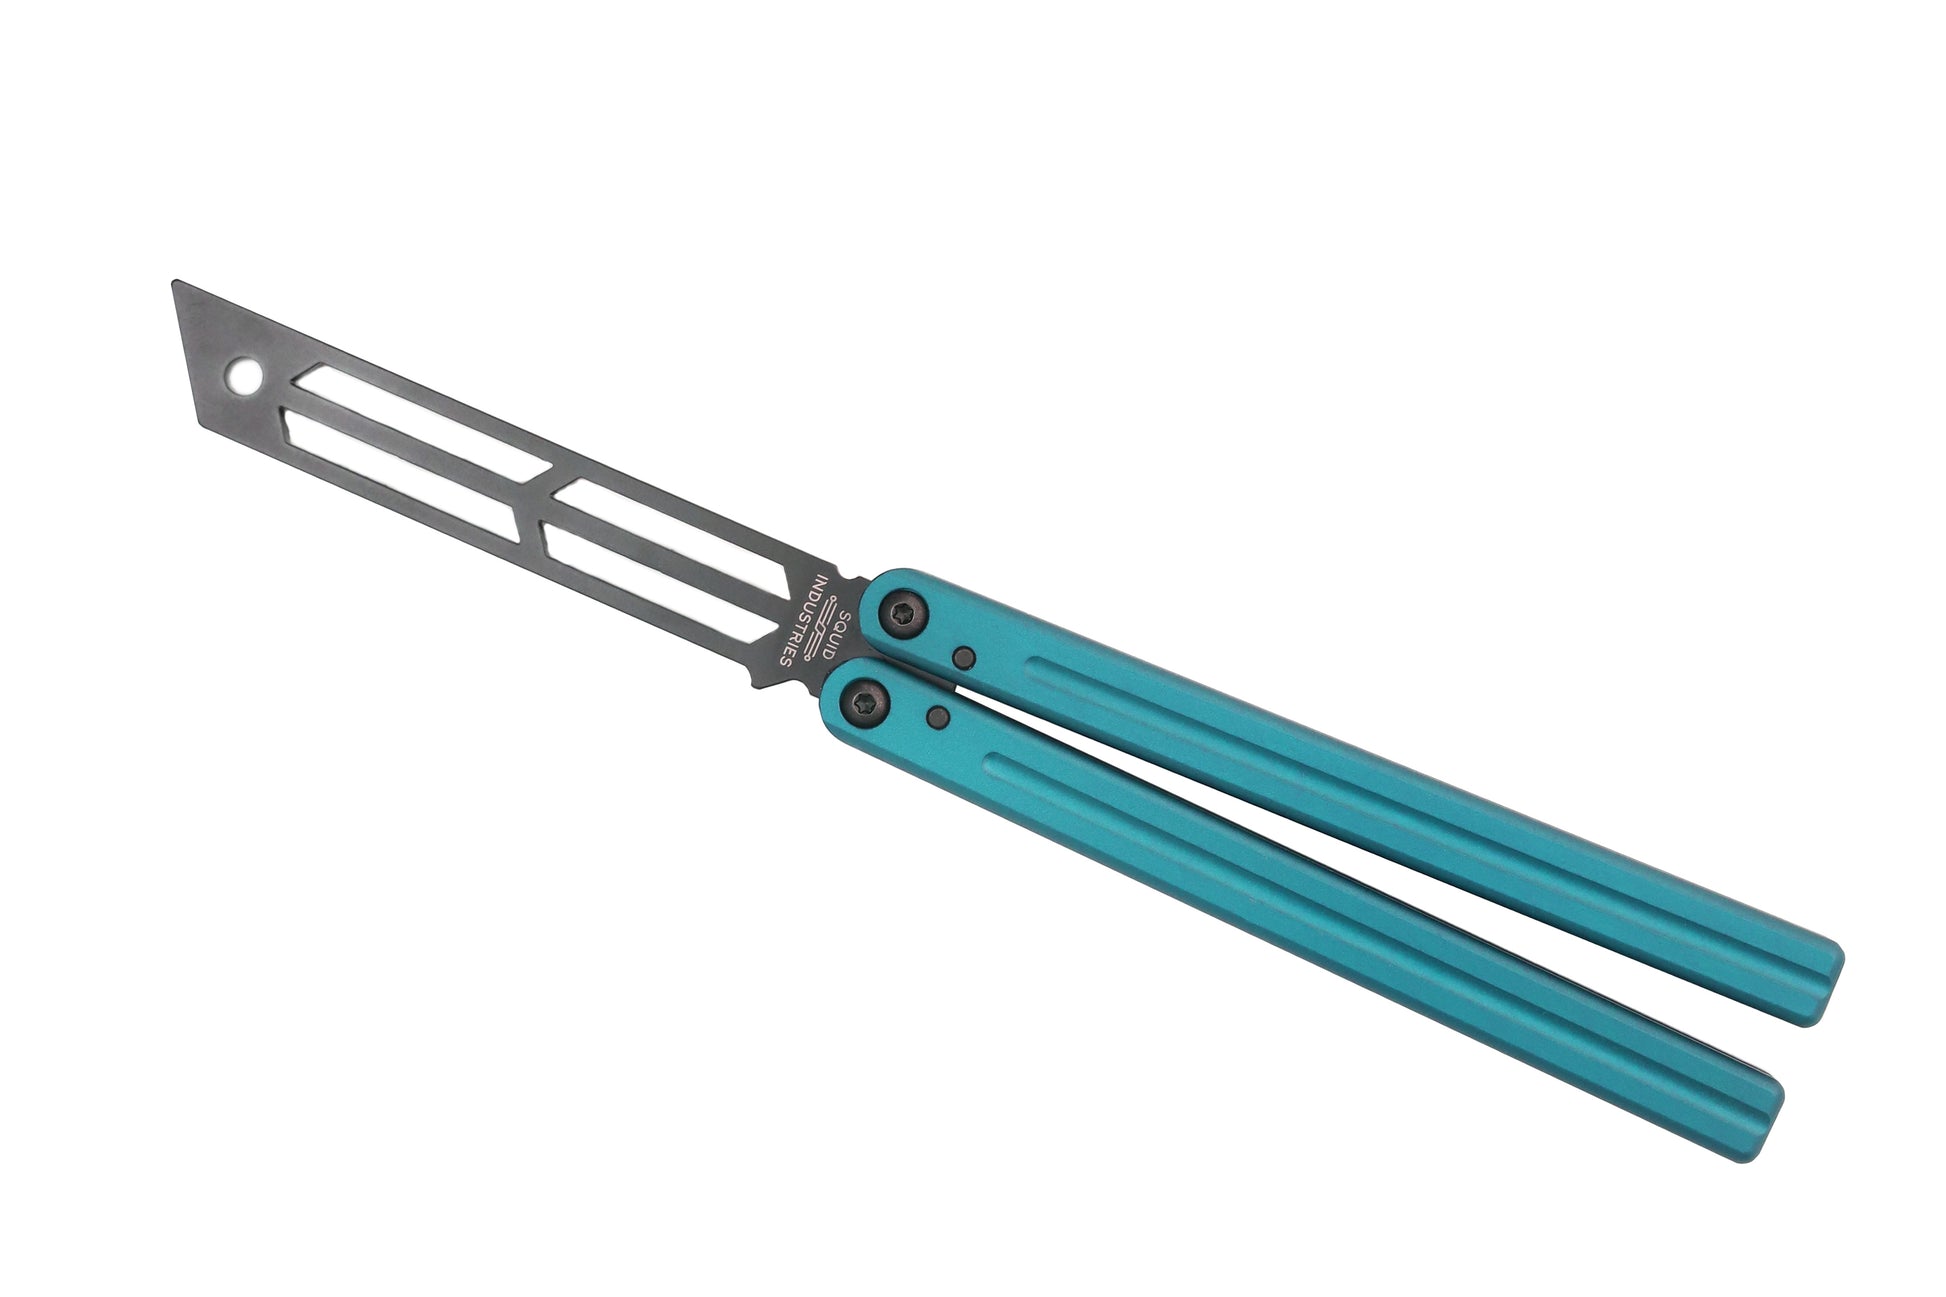 Inked Teal Triton V2 Clearance Blemished Balisong Butterfly Knife Trainer